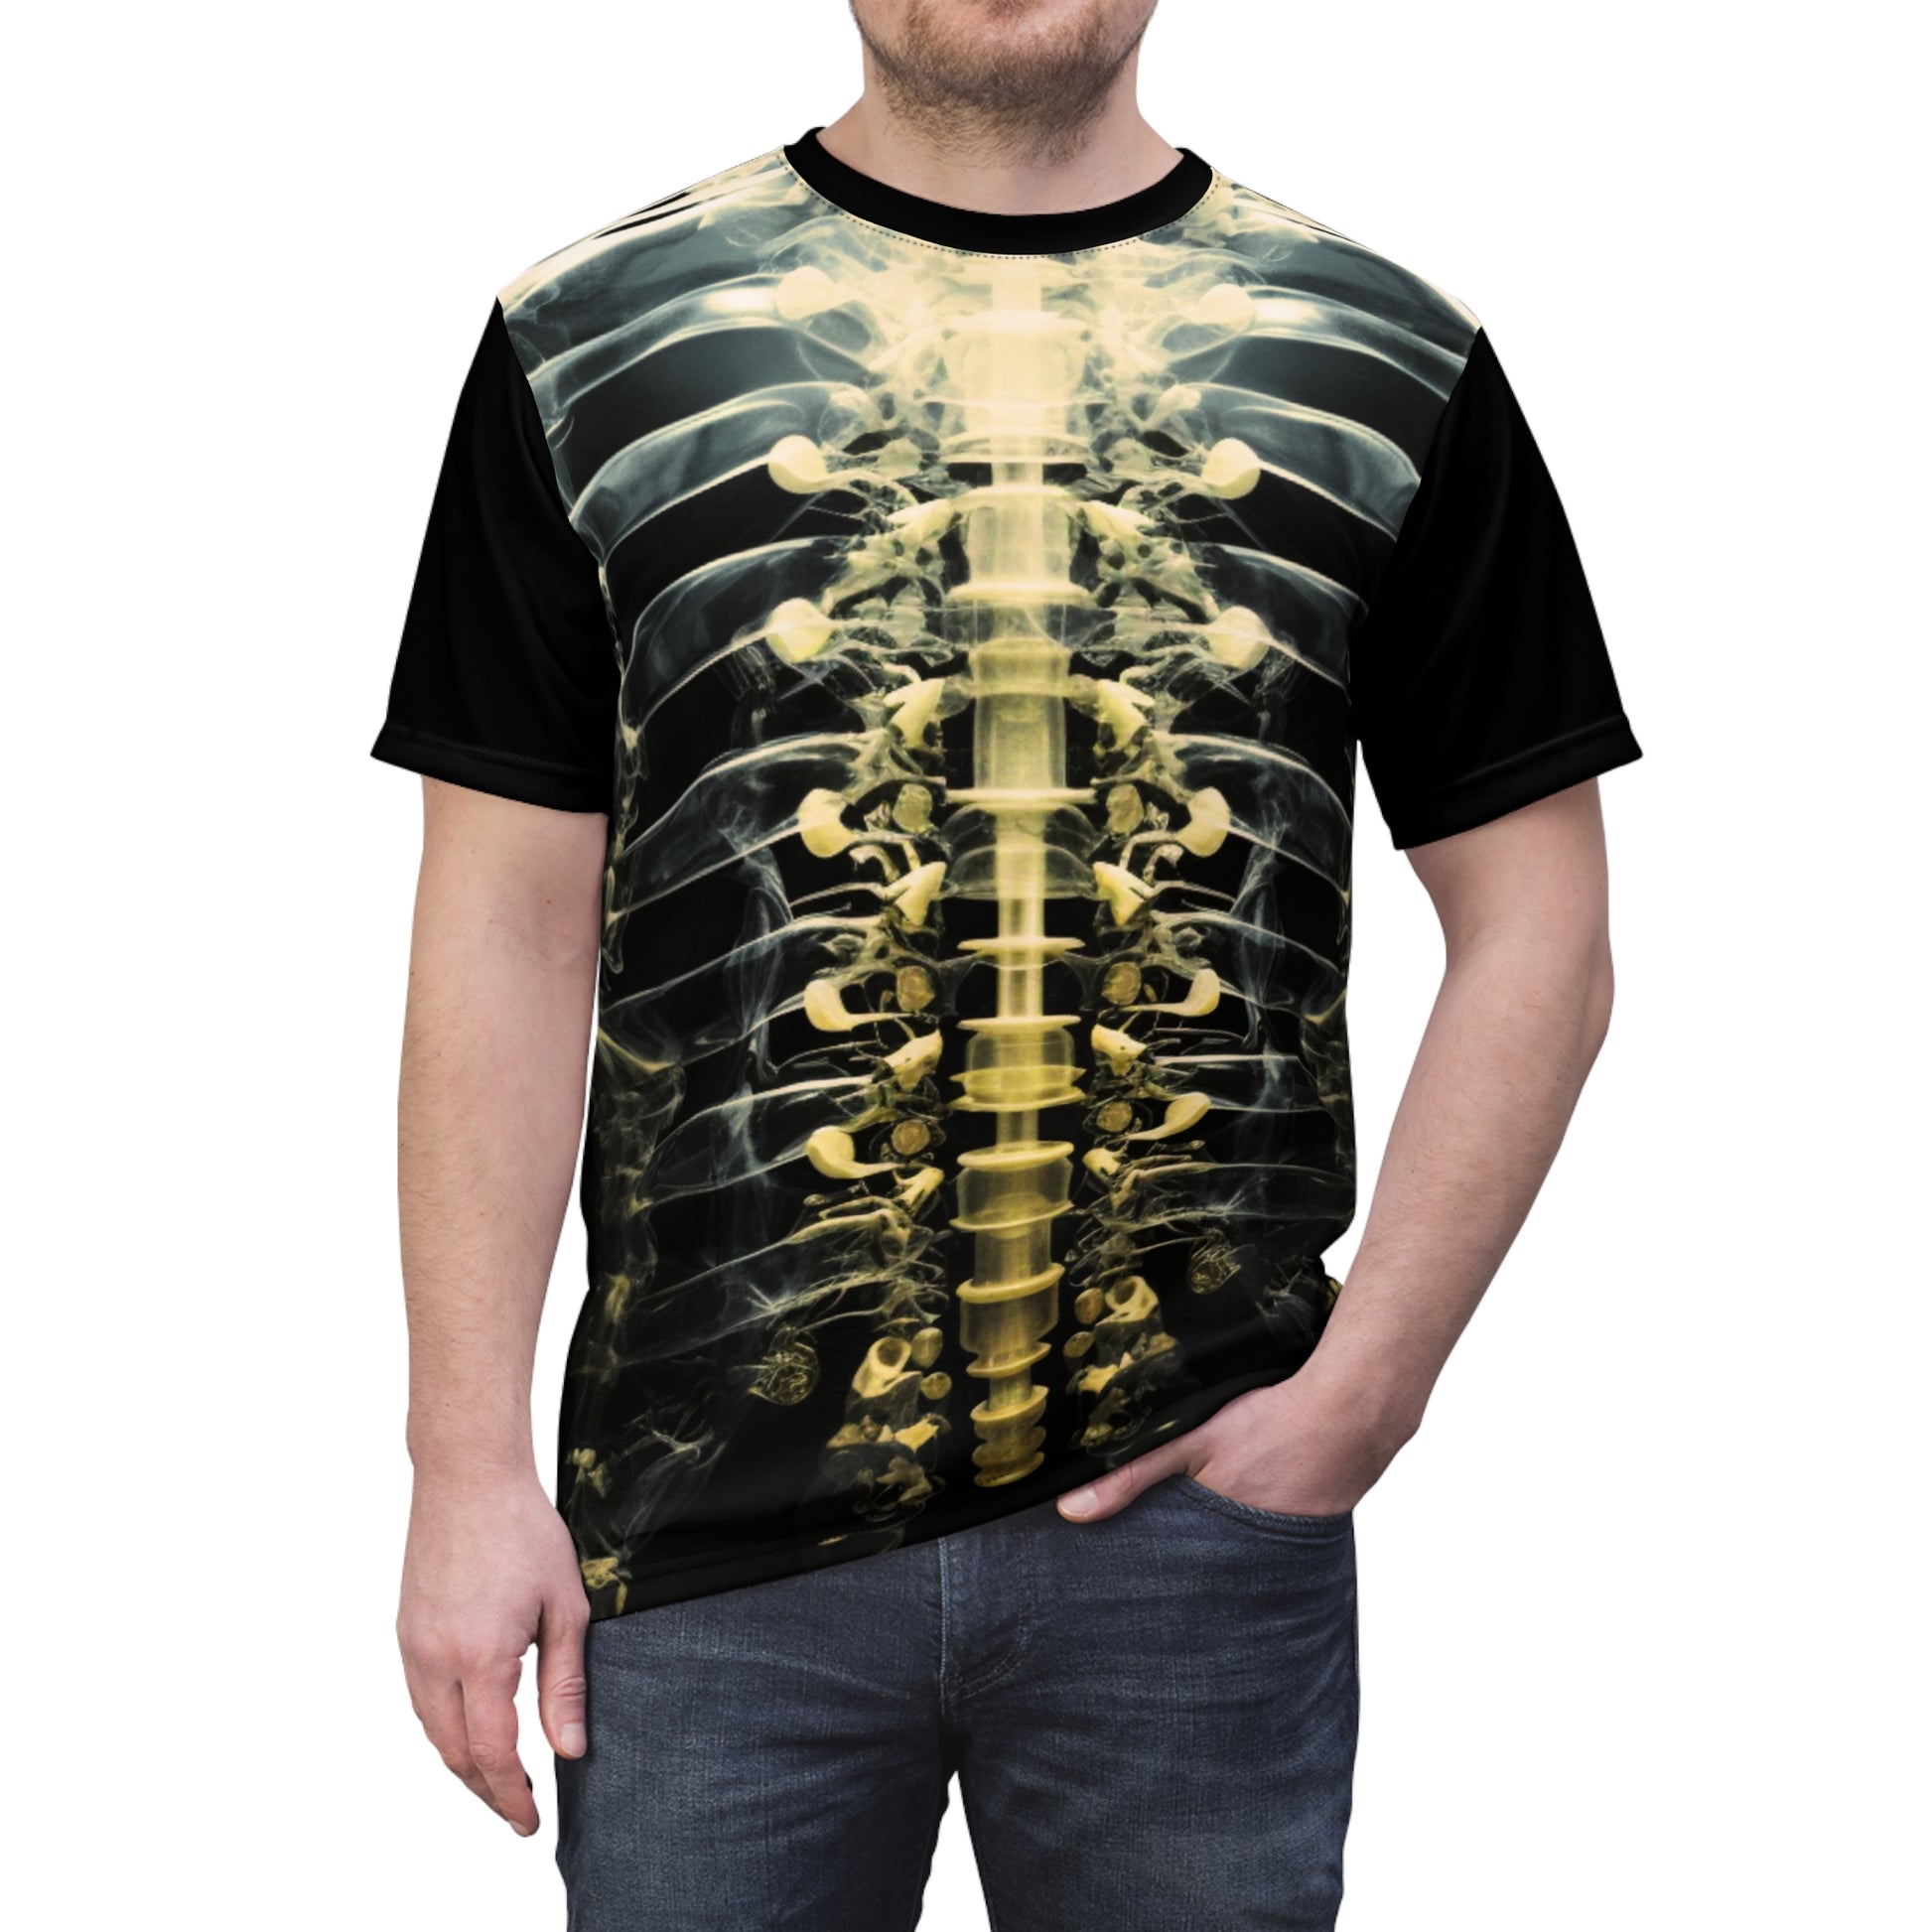 Wear Art with Our Torsion Human Body X-Ray All Over Print T-Shirt - Unique and Strikingly Detailed Design for Medical and Art Enthusiasts All Over Prints Black stitching 4 oz. S